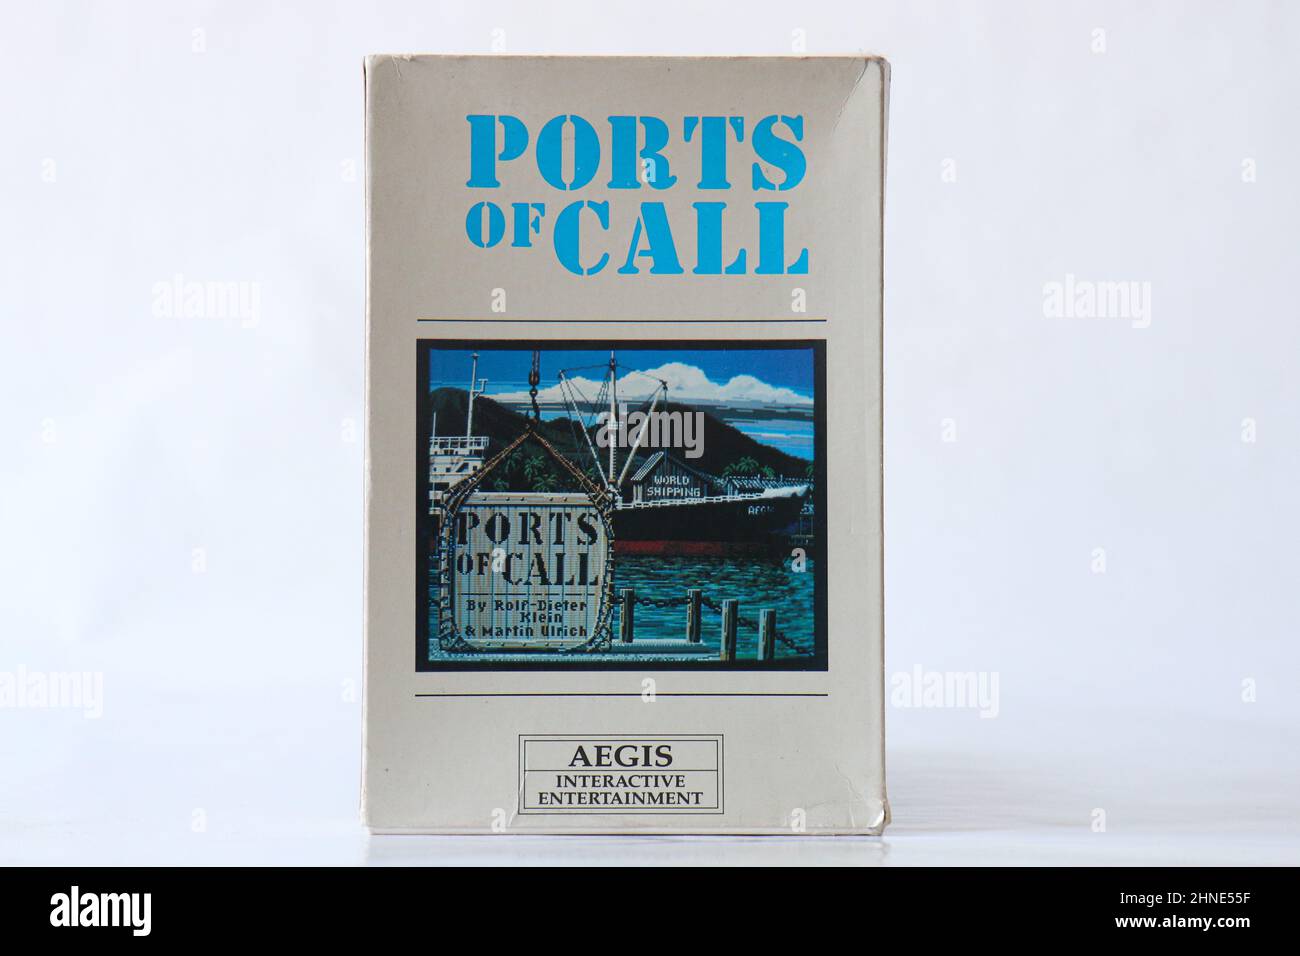 BERLIN - FEBRUARY 12, 2022: Vintage Retro Video Game PORTS OF CALL for the Commodore Amiga on Floppy Disks. Aegis released this Strategy Game in 1987. Stock Photo